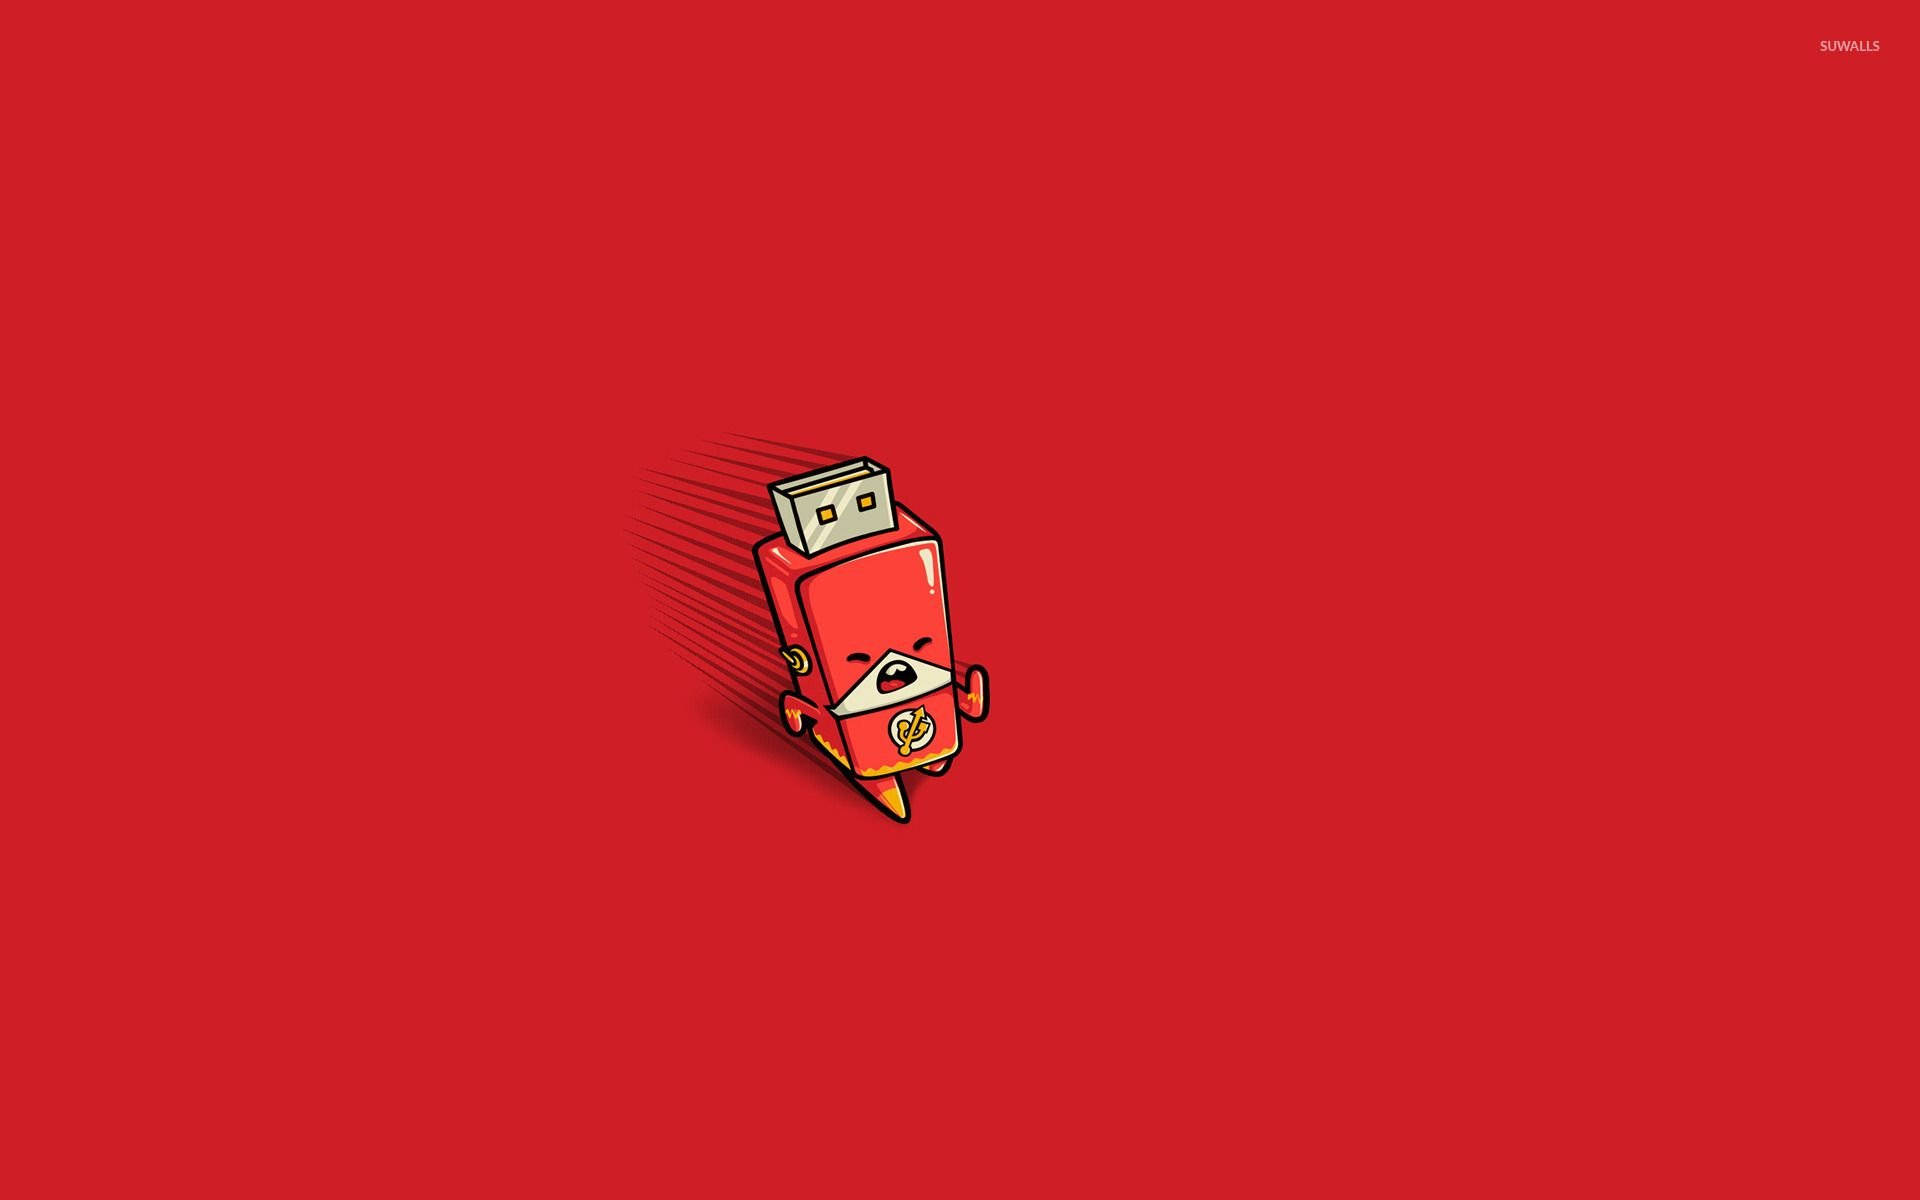 "A quirky technology charm" Wallpaper